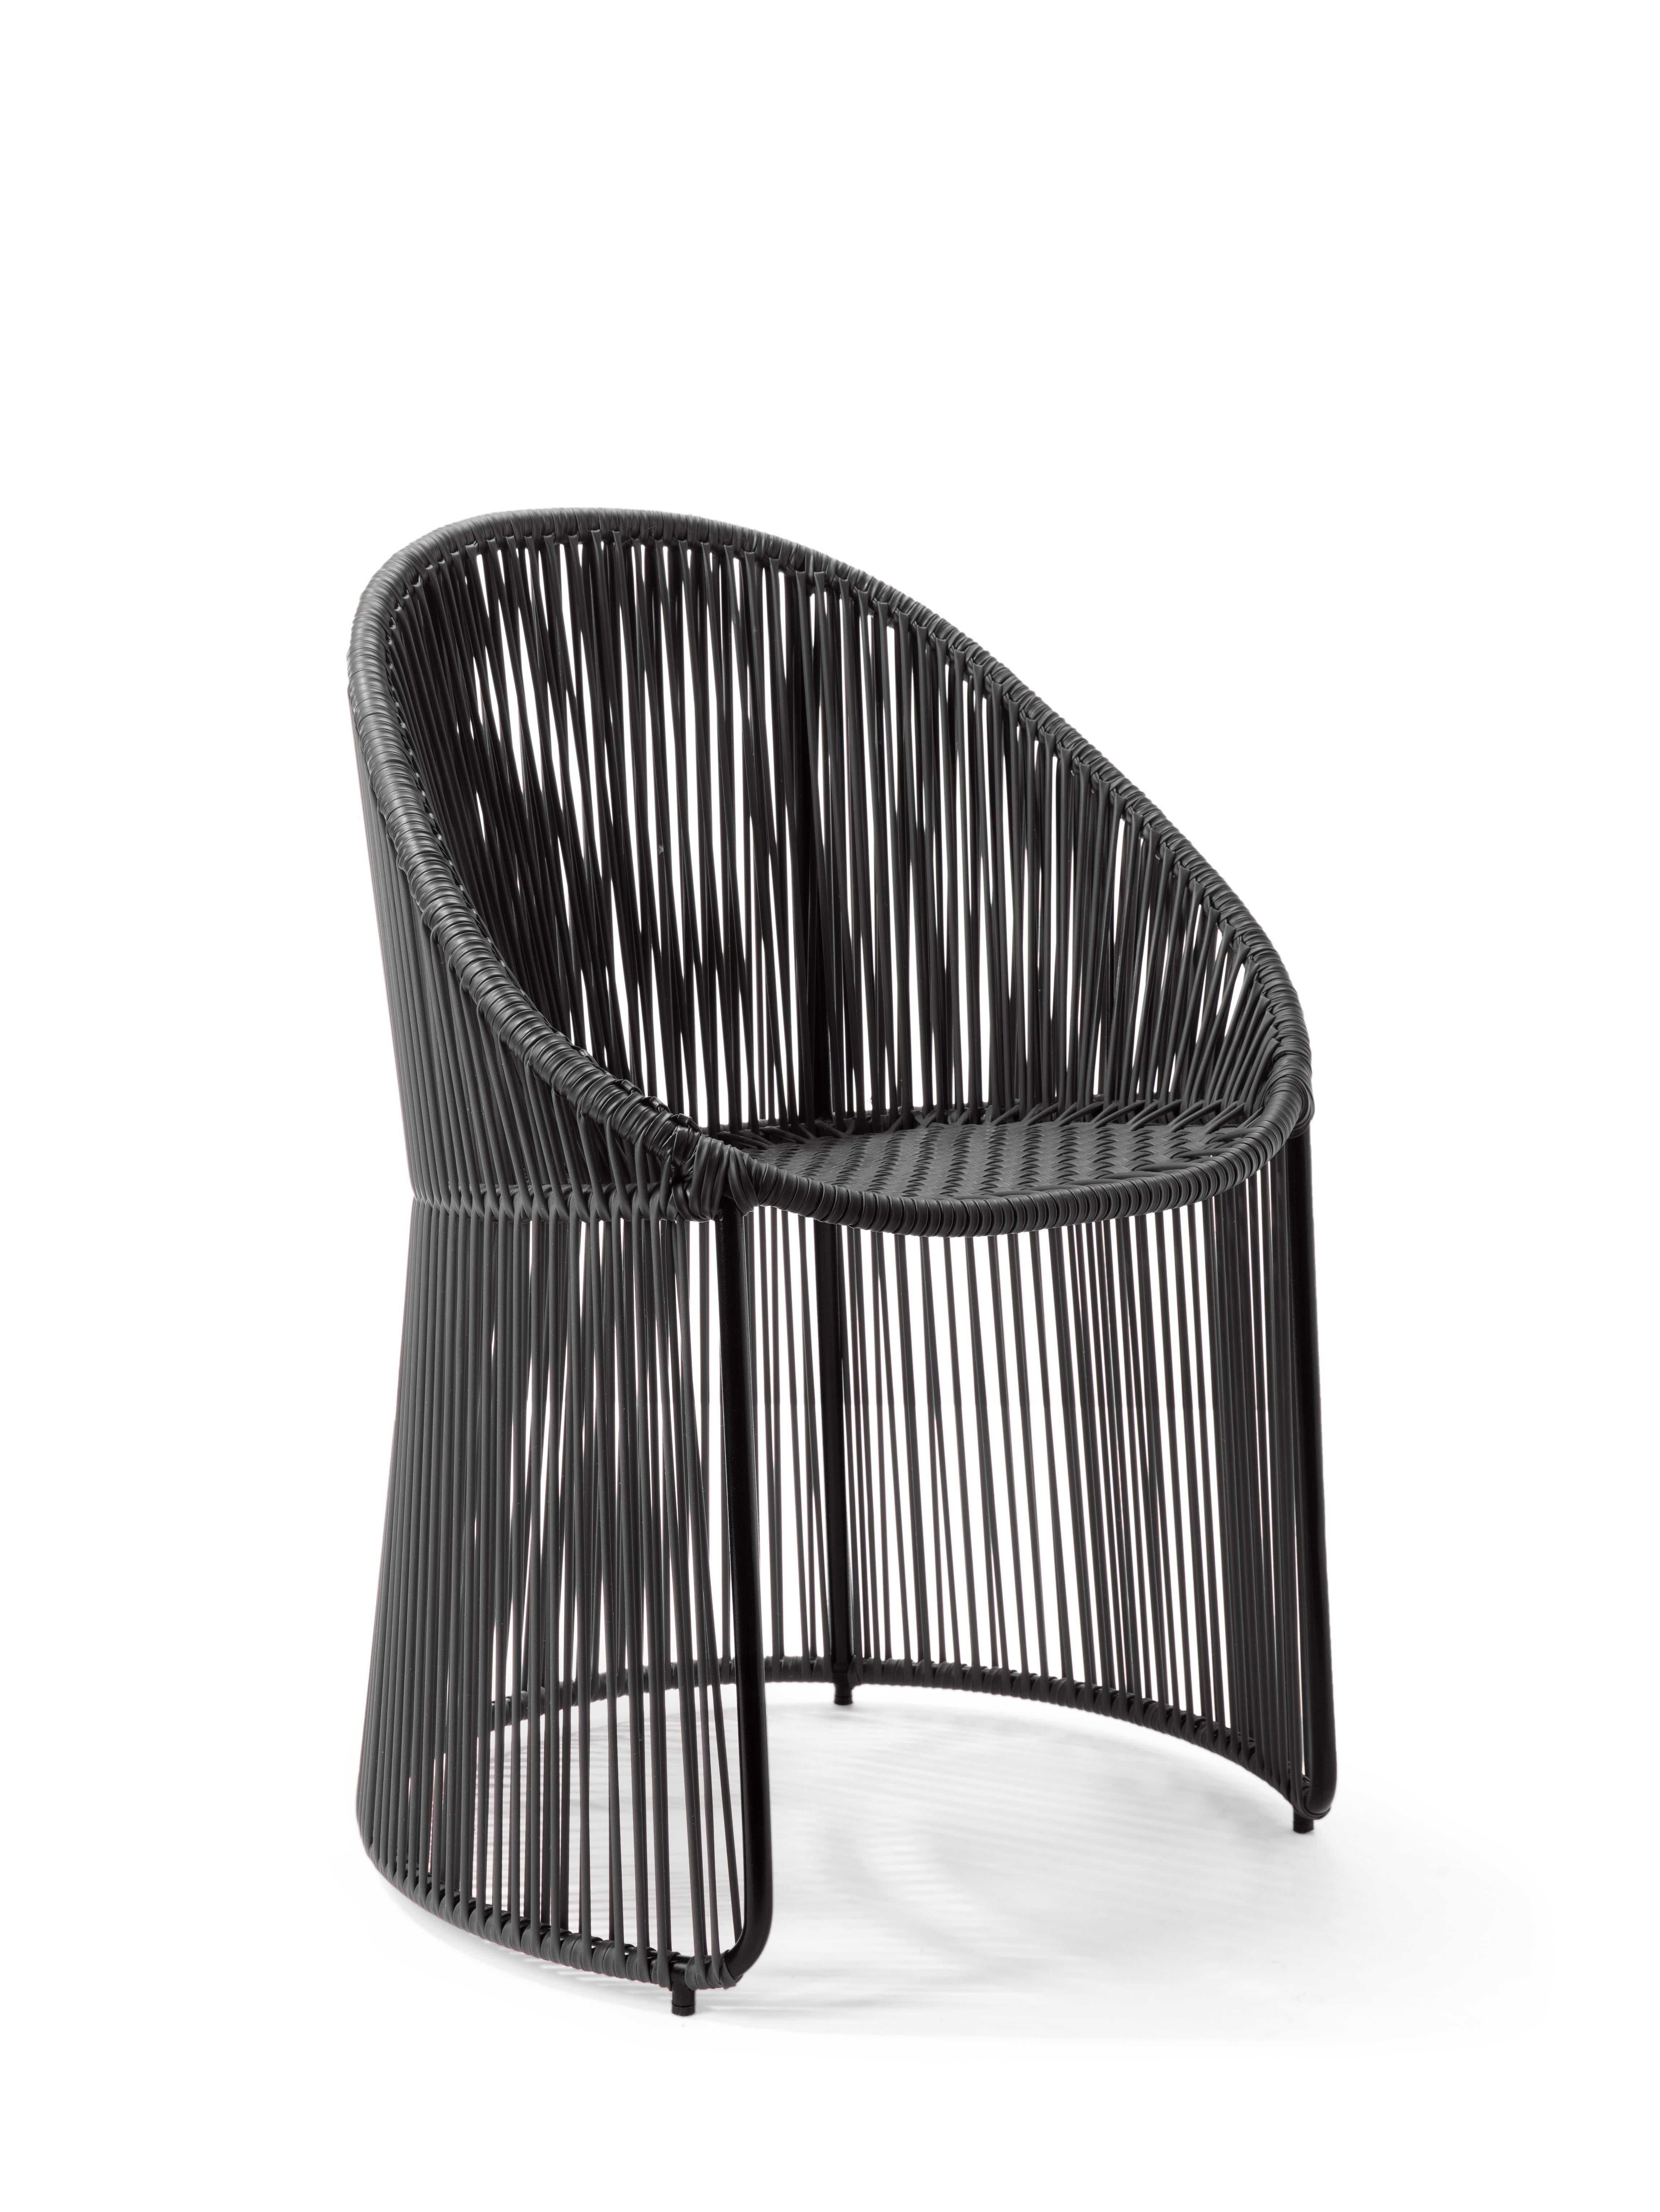 Set of 2 Black Cartagenas lounge chair by Sebastian Herkner
Materials: PVC strings. Galvanized and powder-coated tubular steel frame
Technique: made from recycled plastic. Weaved by local craftspeople in Colombia. 
Dimensions: W 64 x D 70 x H 74